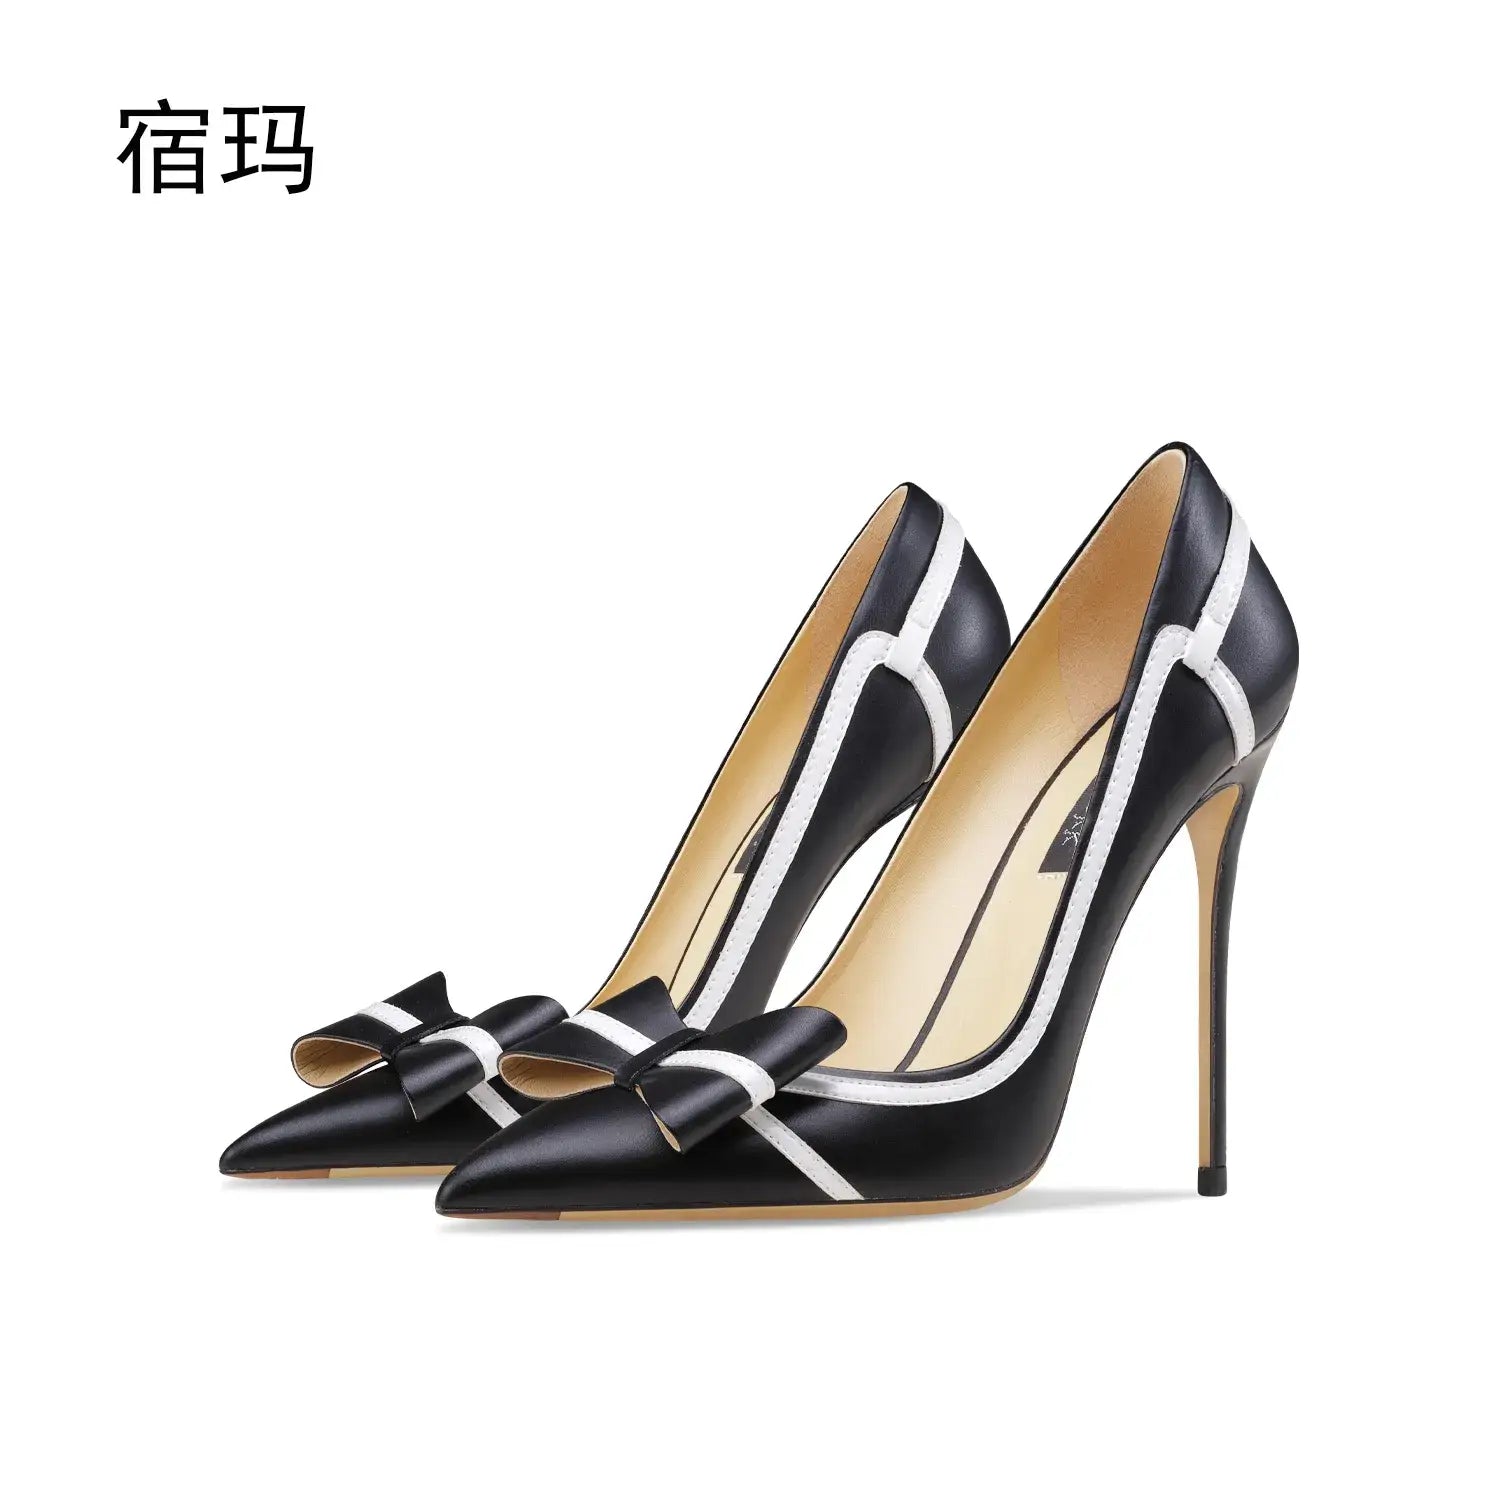 Real leather butterfly-knot high heels stiletto pumps - black 8cm / 33 / gb